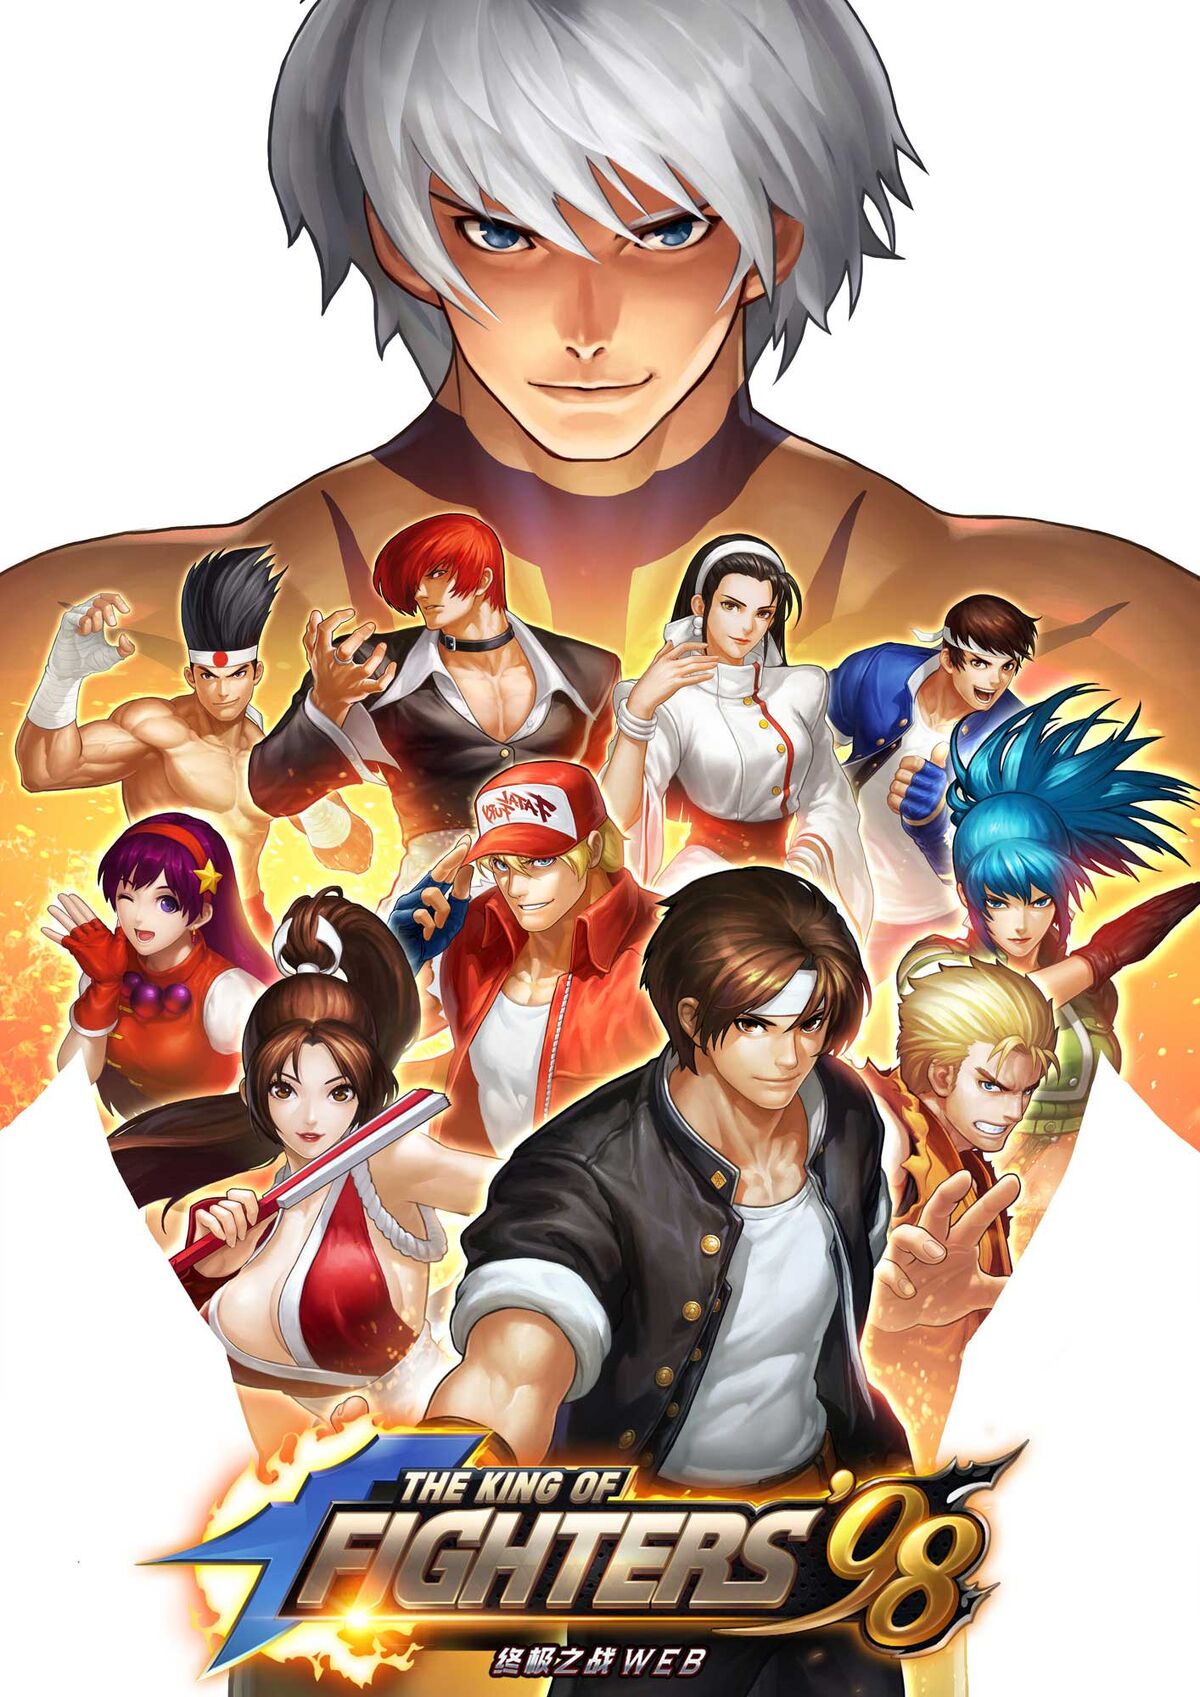 The King of Fighters '98: Dream Match Never Ends, SNK Wiki